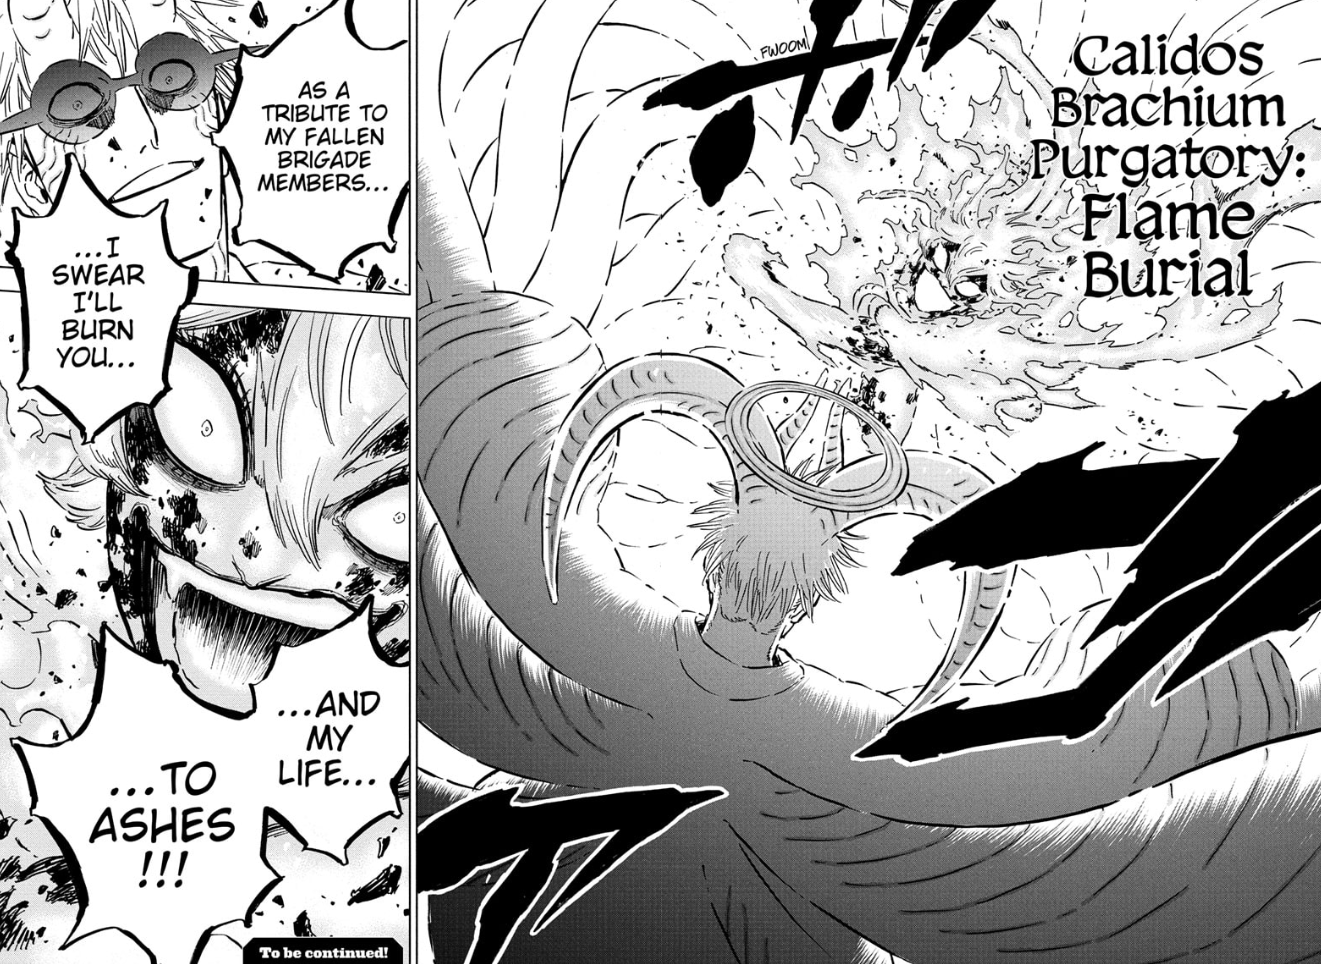 Black Clover Chapter 358 English Translations Disappoint Online Fans